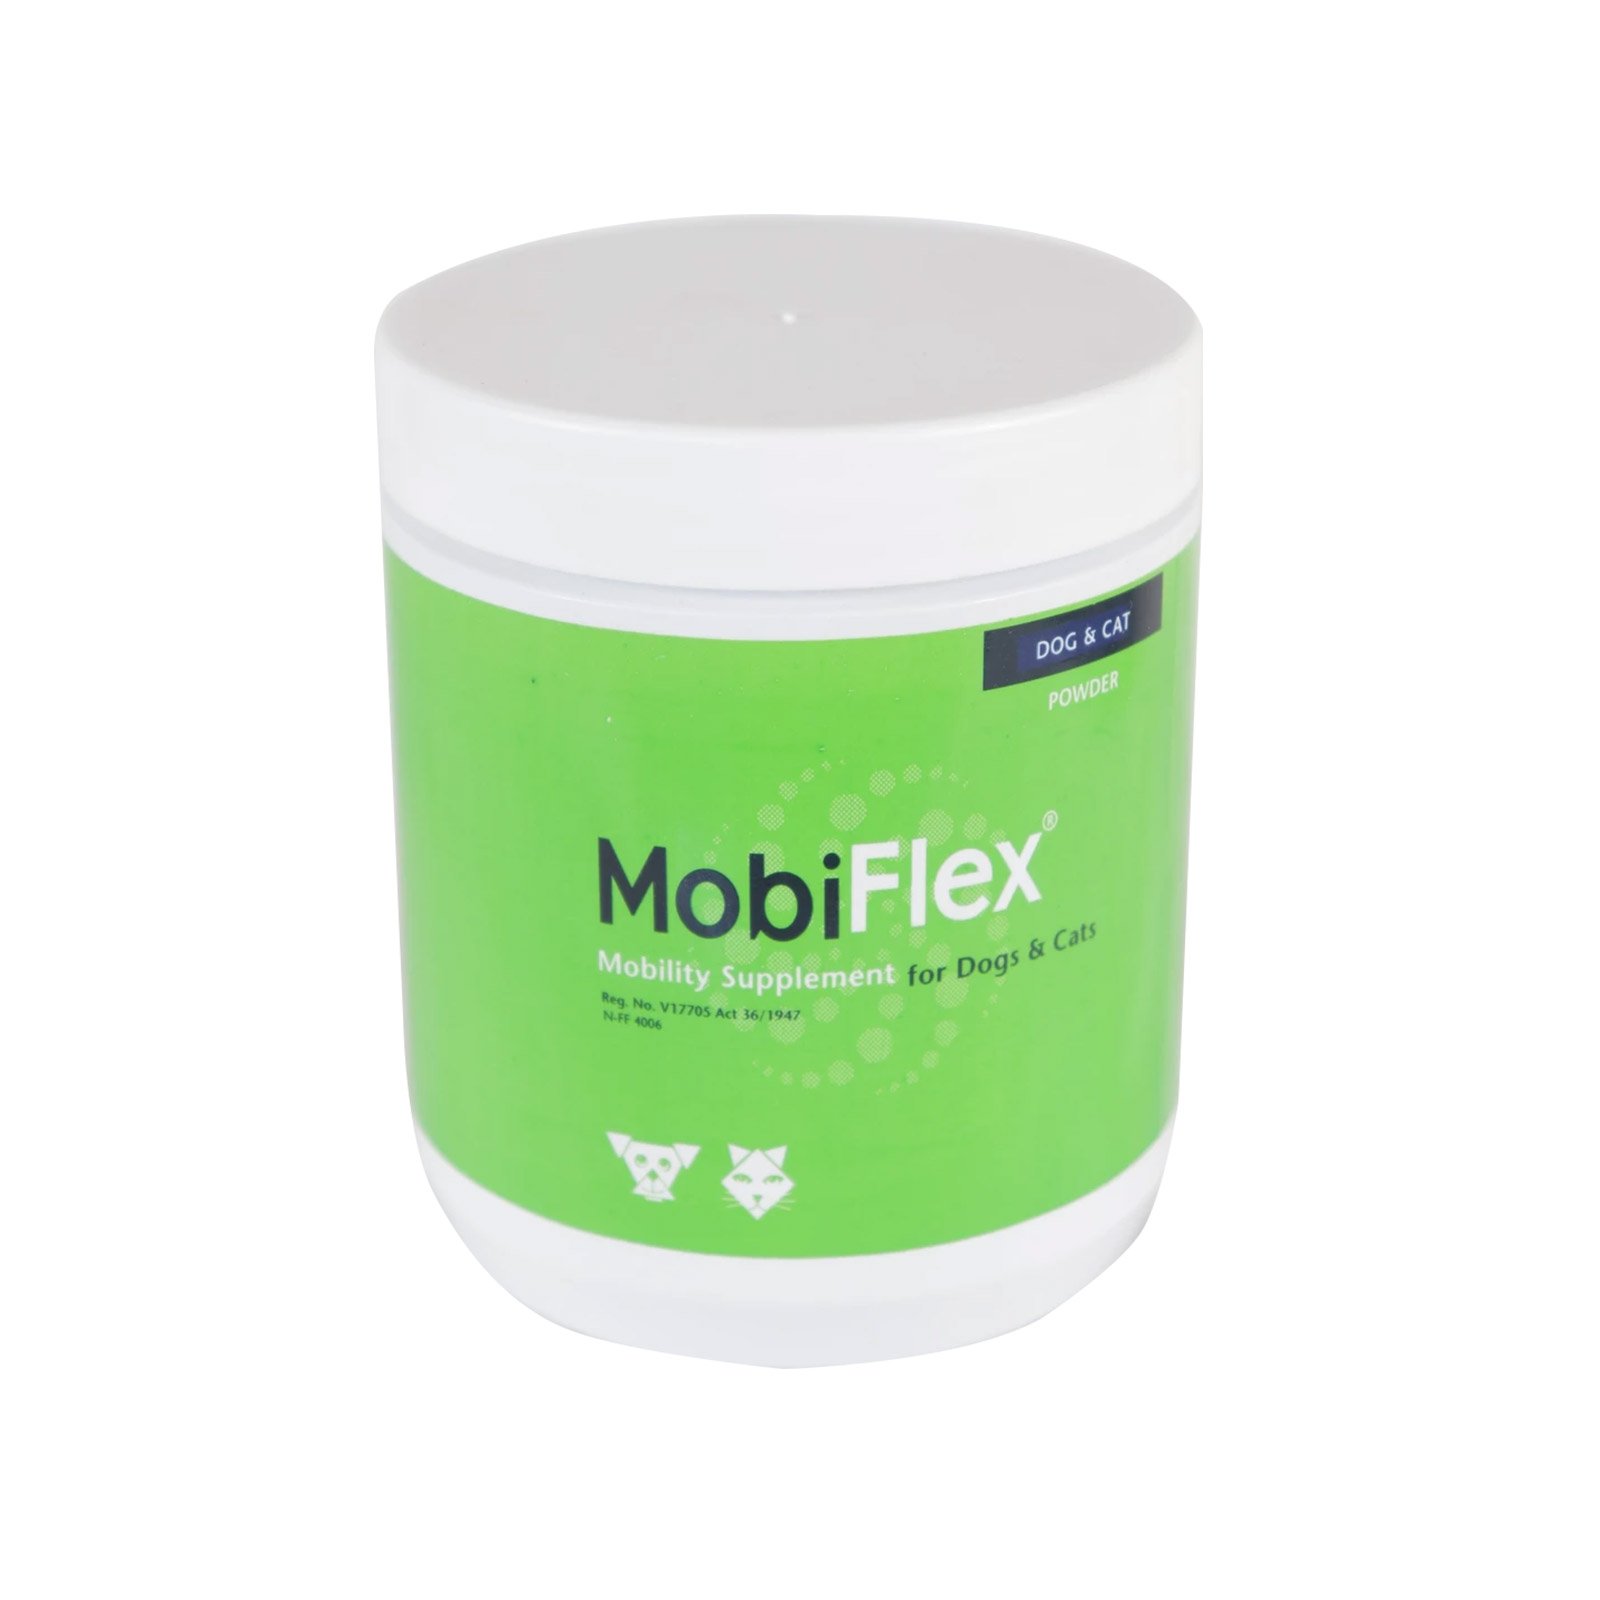 MOBIFLEX JOINT CARE for Dogs